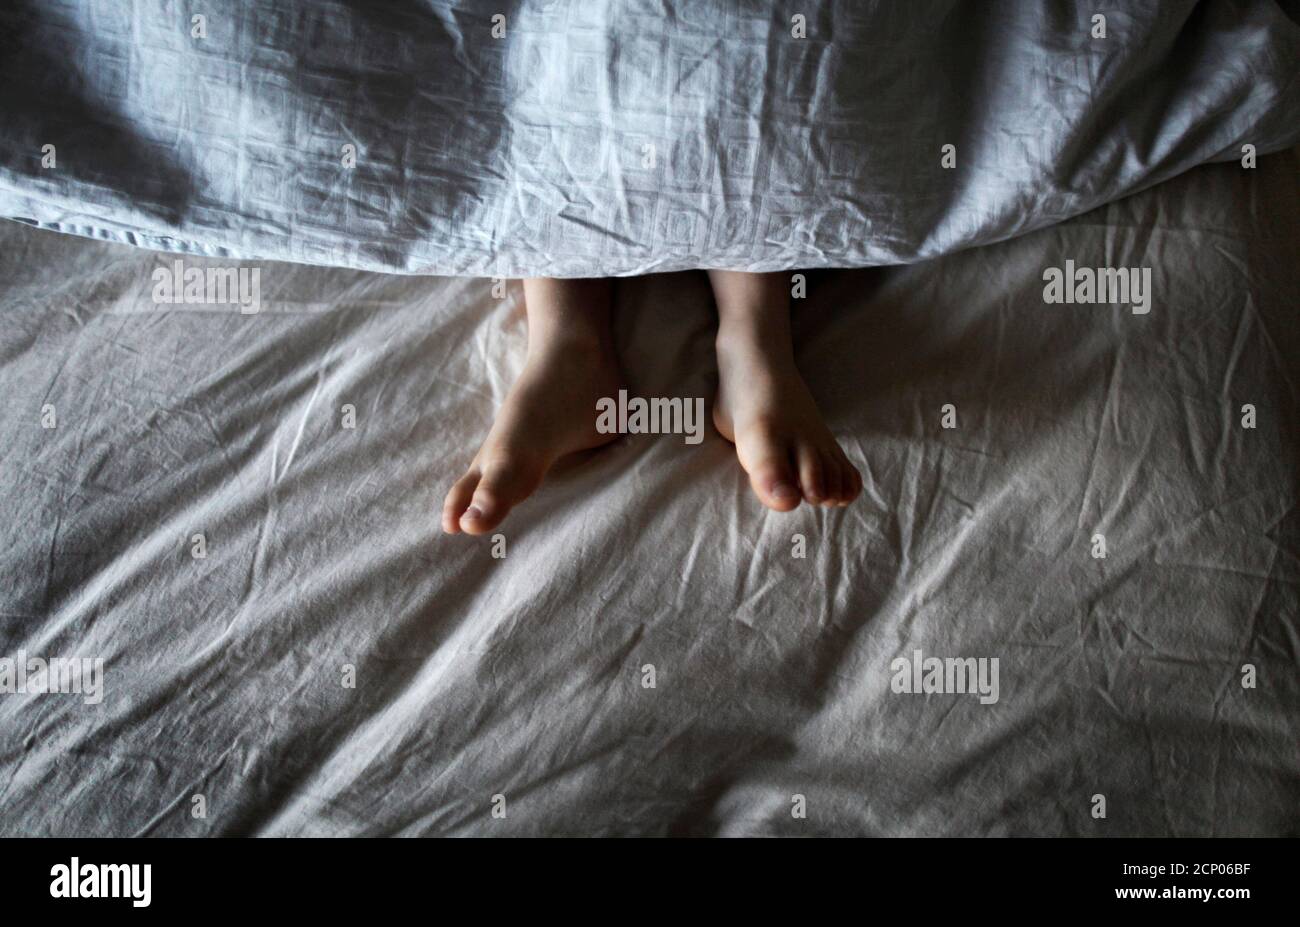 Four-year-old Morgan Wimborne sleeps at home in Sydney, May 15, 2012. Photographer Tim Wimborne took the photo early morning for the A Day project before leaving for an assignment in Afghanistan. Pictures of a house in India, a food cupboard in New Zealand and someone eating breakfast in Sweden were among the first of thousands of photographs sent to an Internet project to capture a day in the life of people all over the world on Tuesday. The Swedish-based project, www.aday.org , has got backing from figures in entertainment, politics and business, who are also going to upload photos of their  Stock Photo